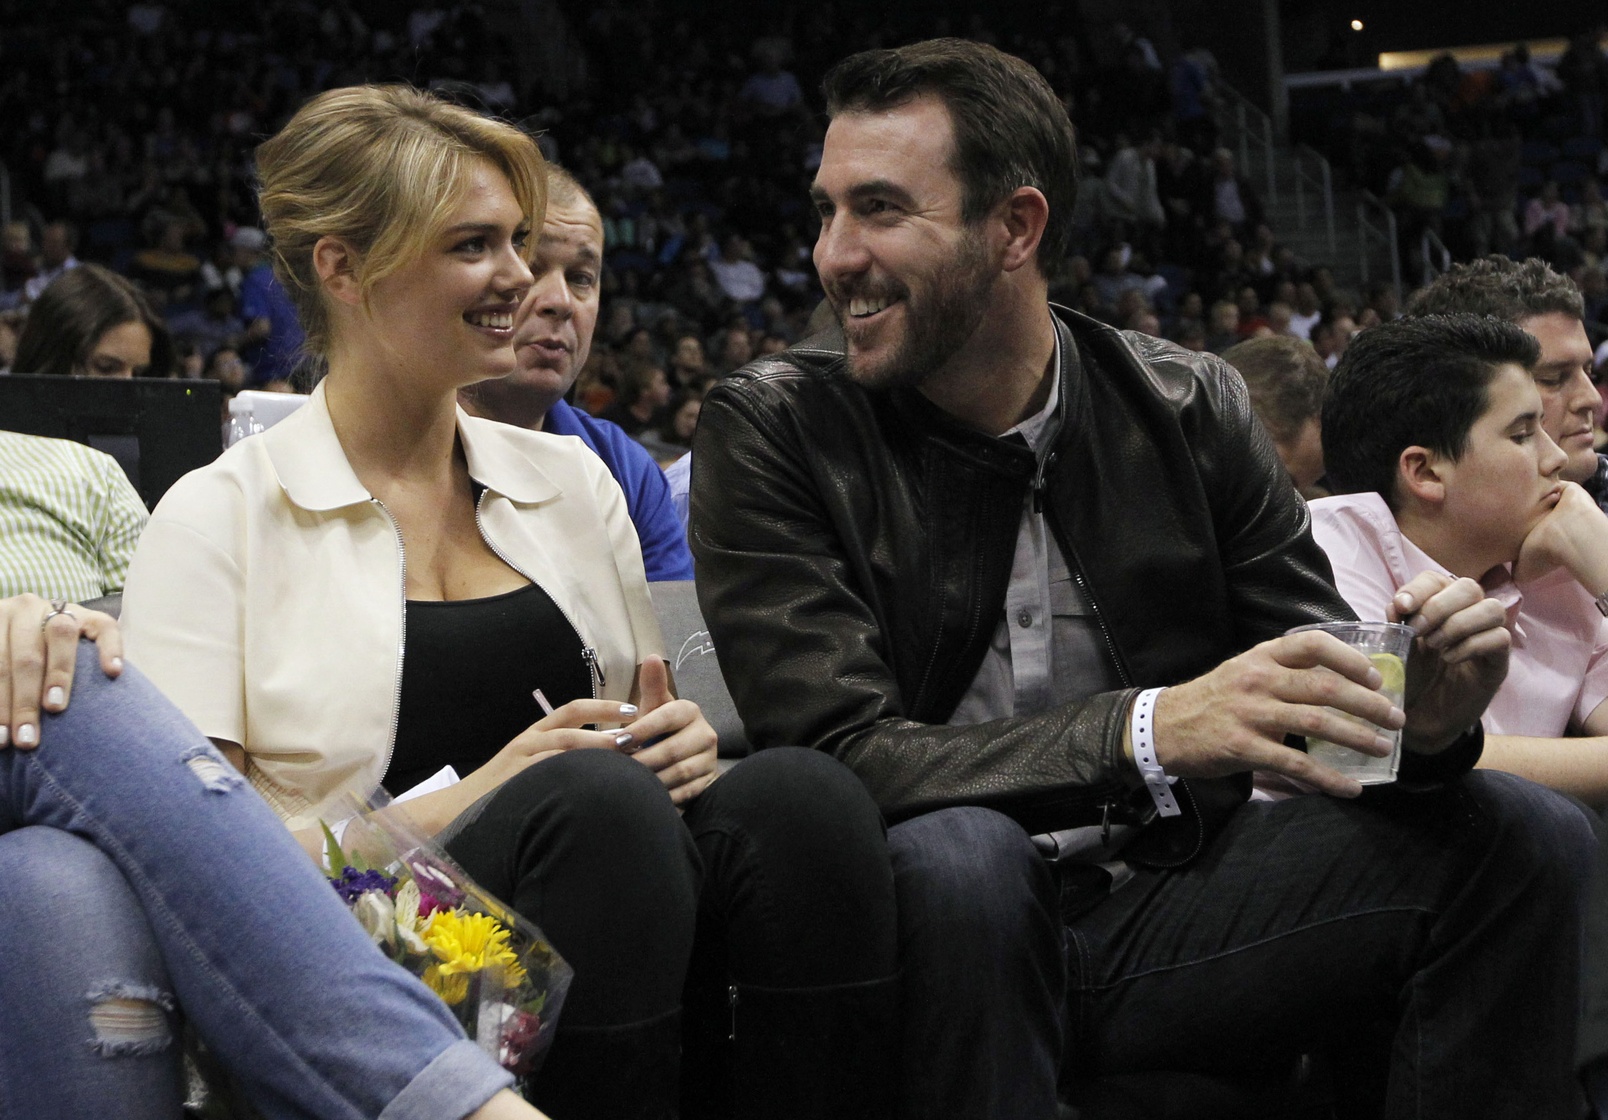 Kate Upton Is Cheating On Justin Verlander With A Hairy Beast1608 x 1120